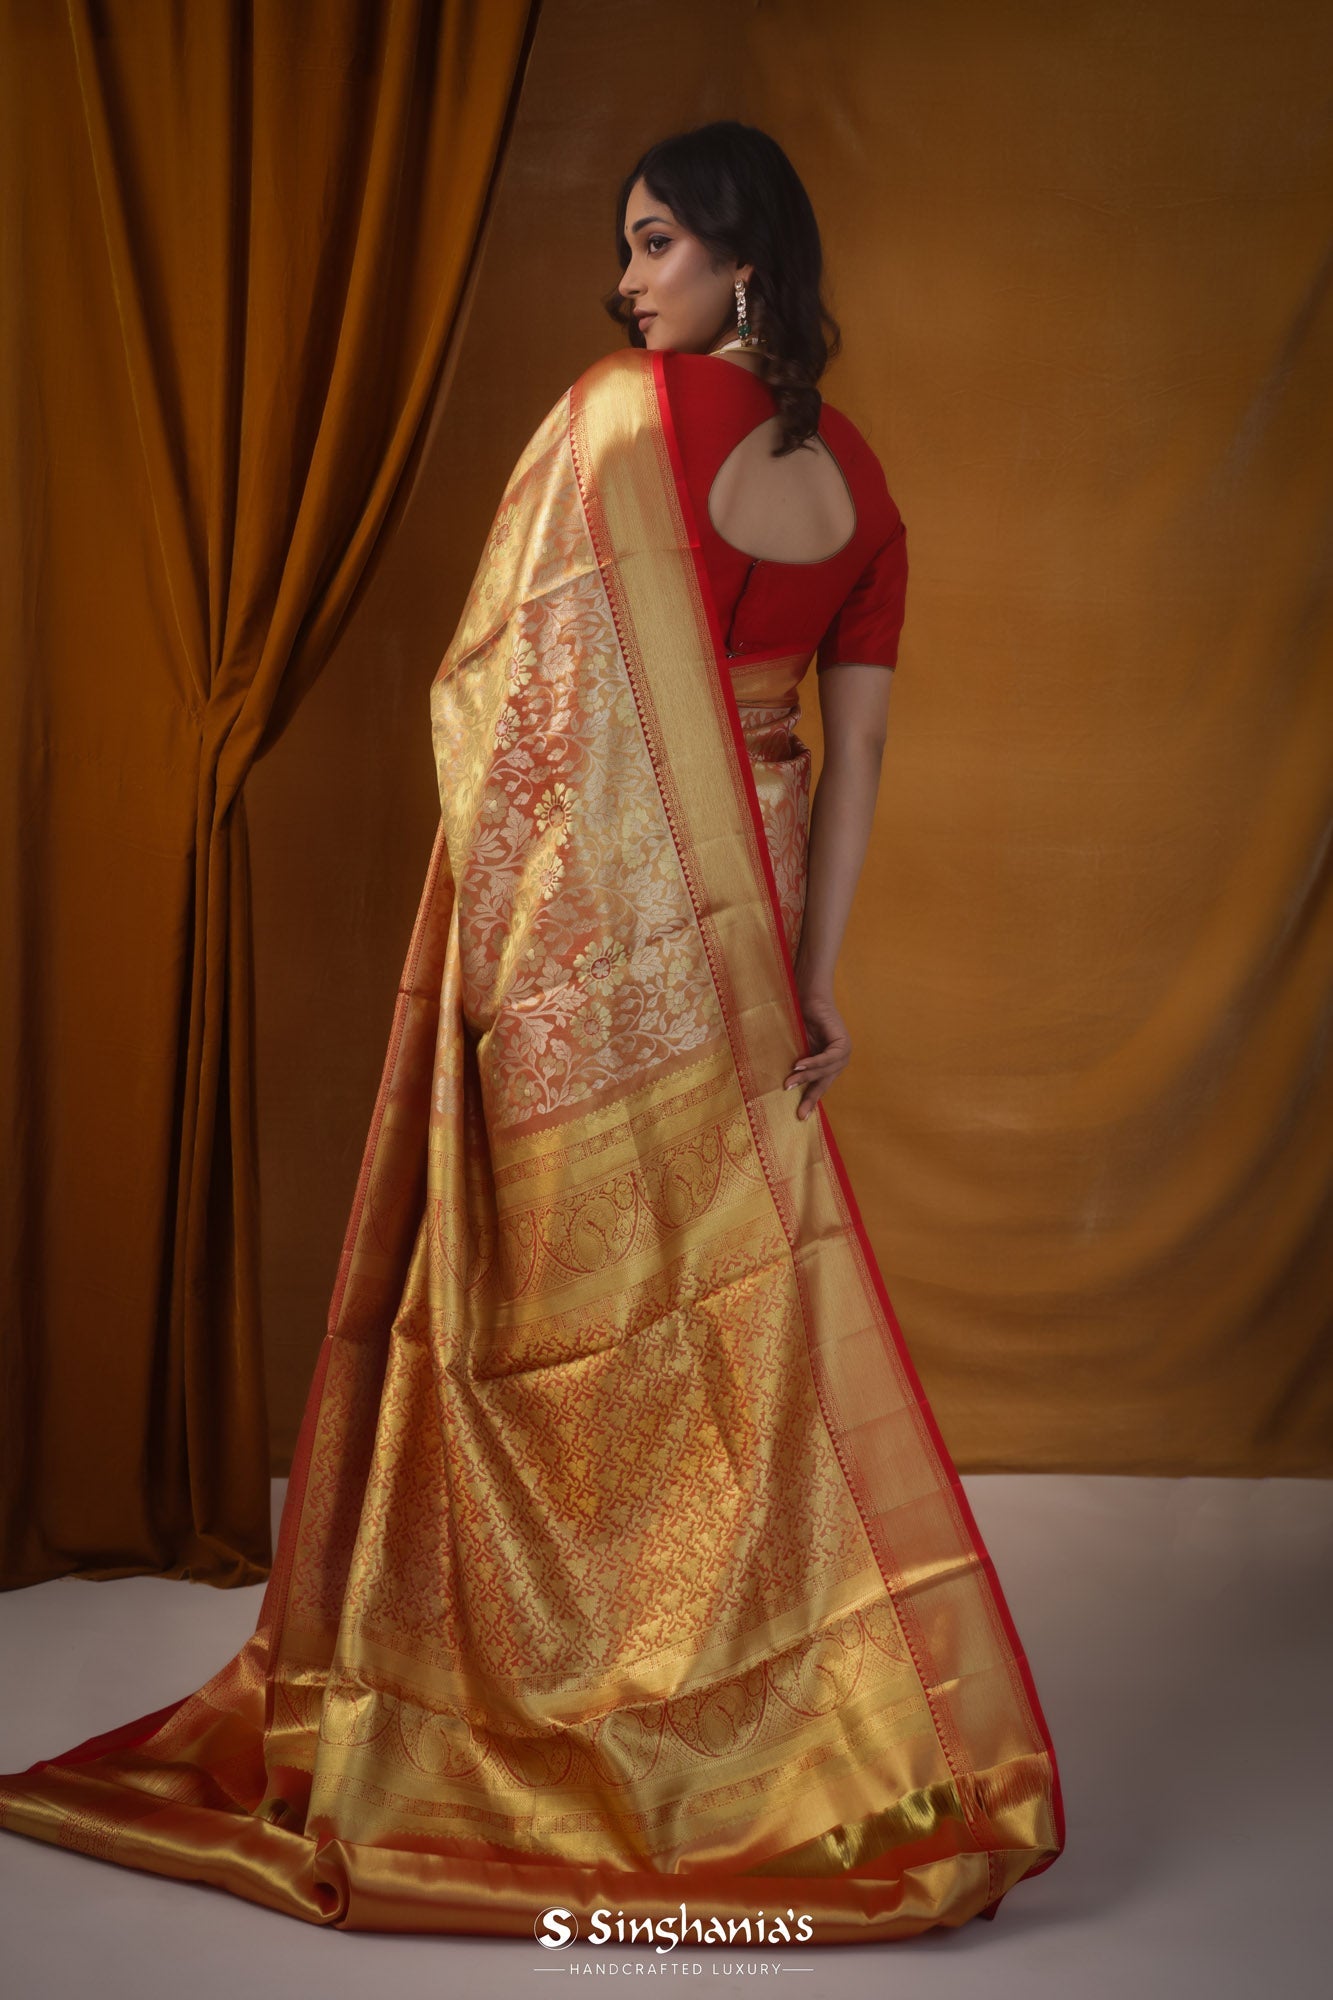 Red Gold Tissue Kanjivaram Saree With Floral Jaal Weaving